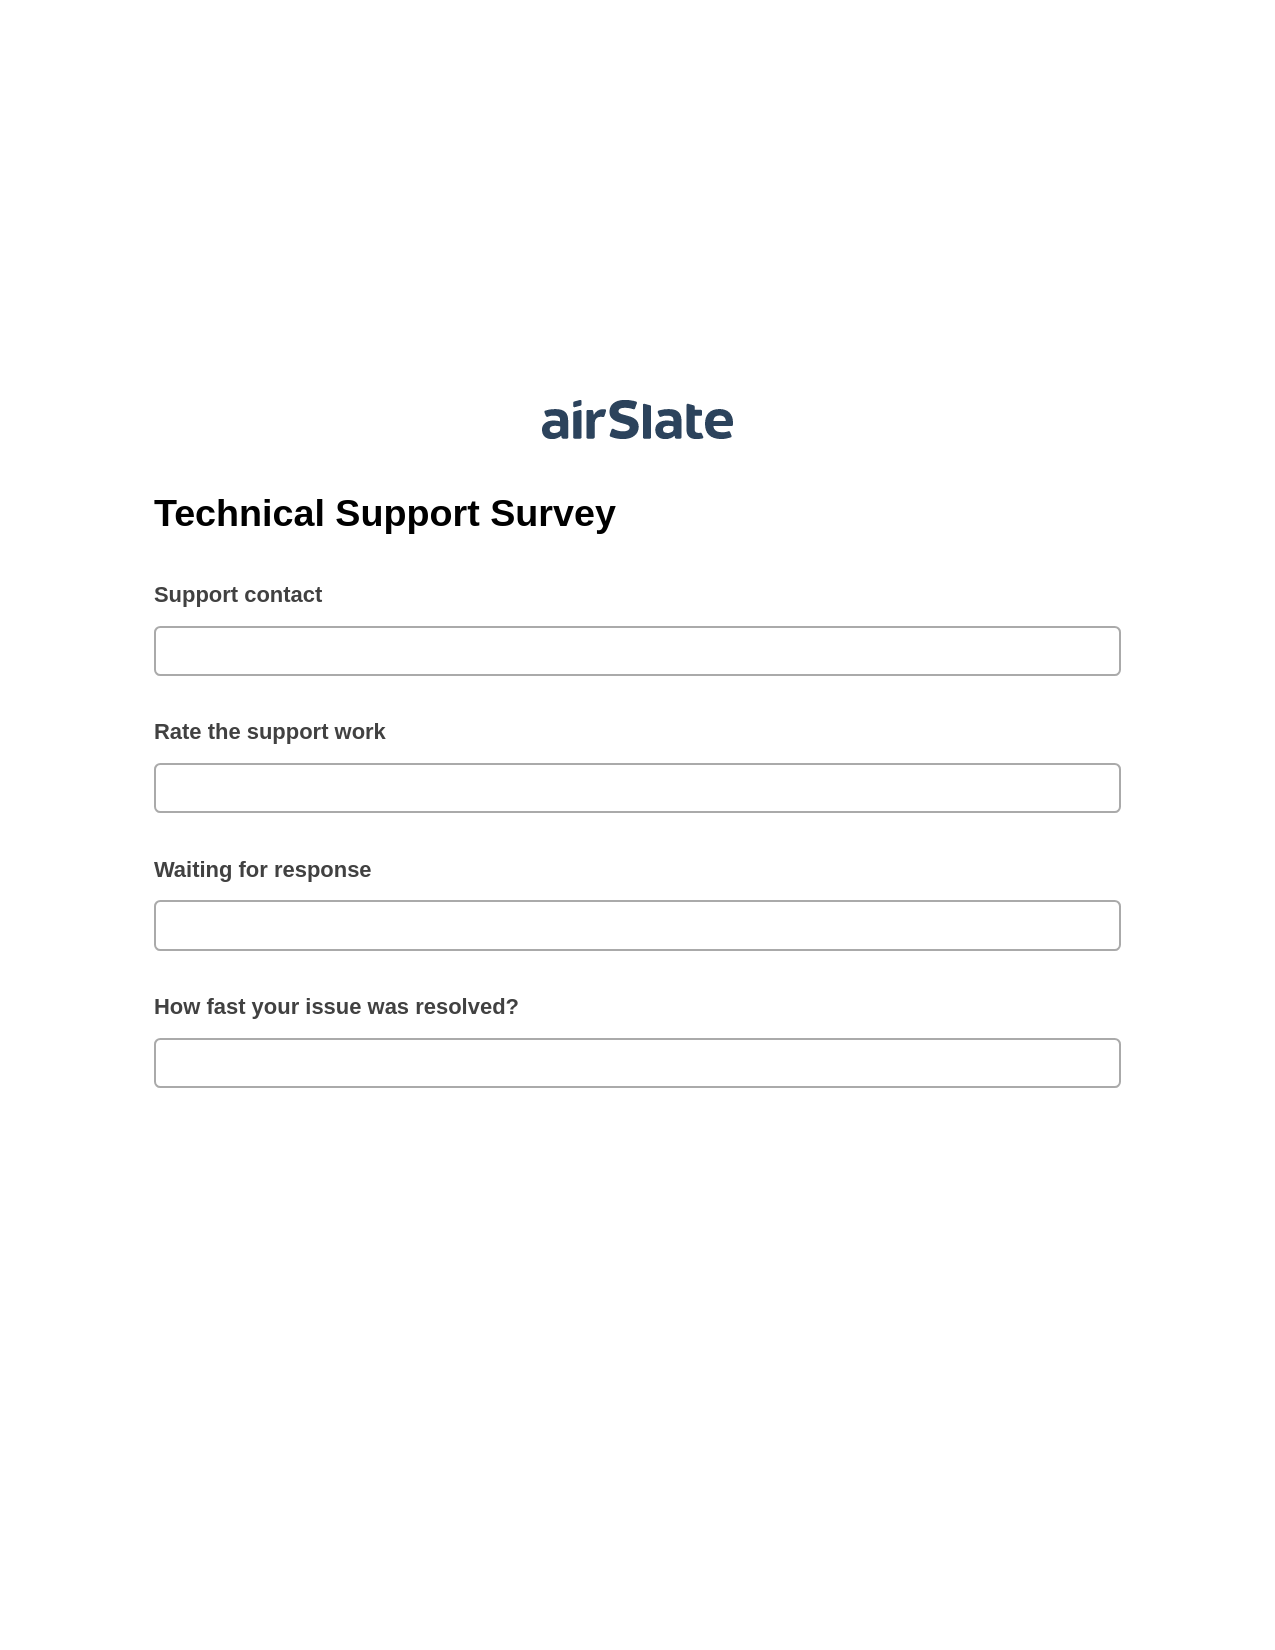 Technical Support Survey Pre-fill Dropdowns from Google Sheet Bot, Update MS Dynamics 365 Record Bot, Export to Salesforce Record Bot